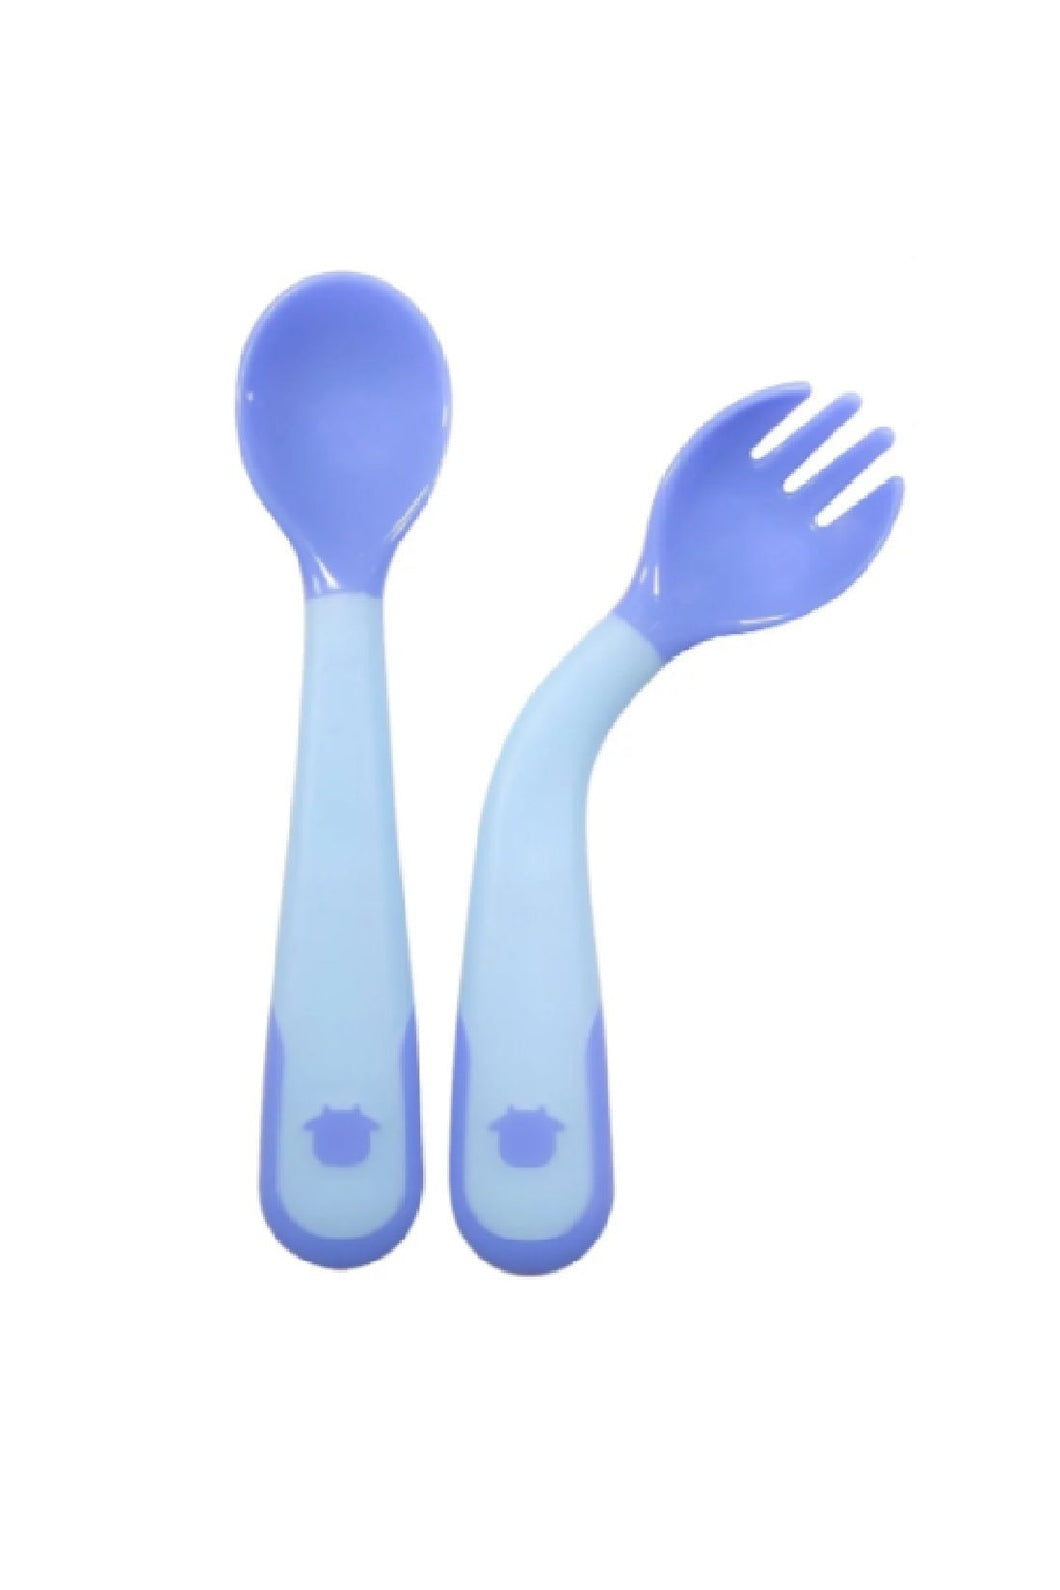 B&H Thermo Sensing Bendable Fork And Spoon Set